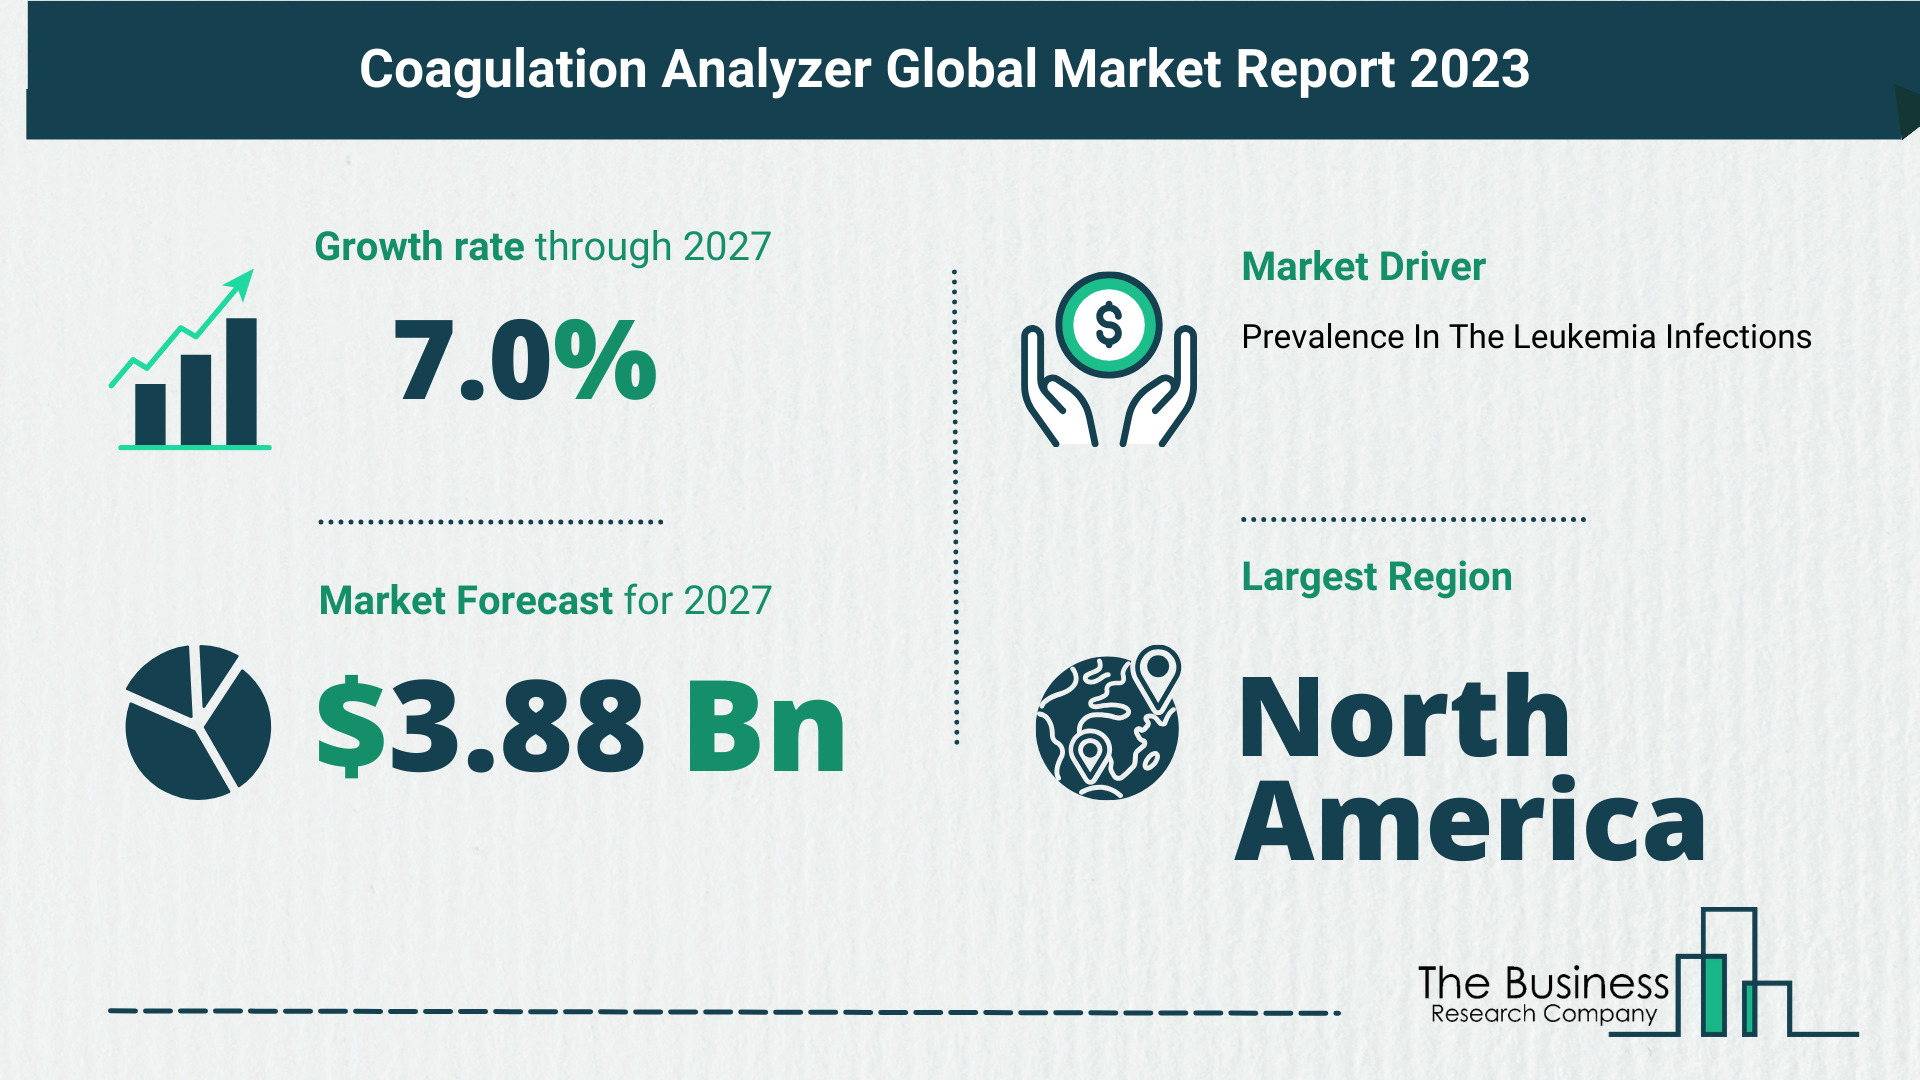 Key Trends And Drivers In The Coagulation Analyzer Market 2023